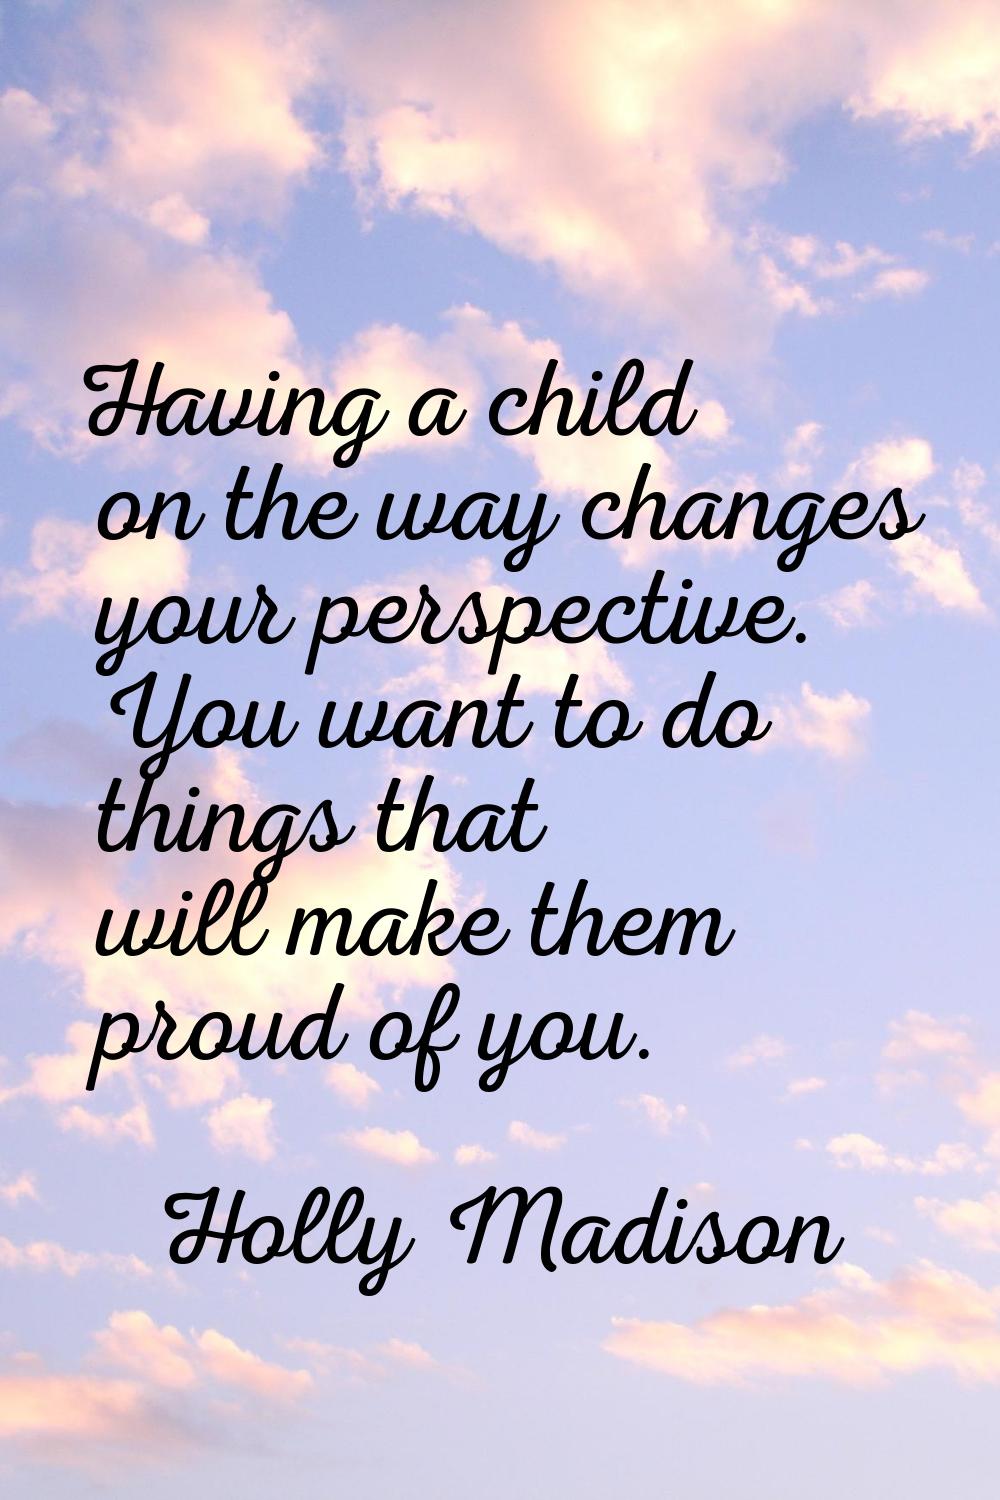 Having a child on the way changes your perspective. You want to do things that will make them proud